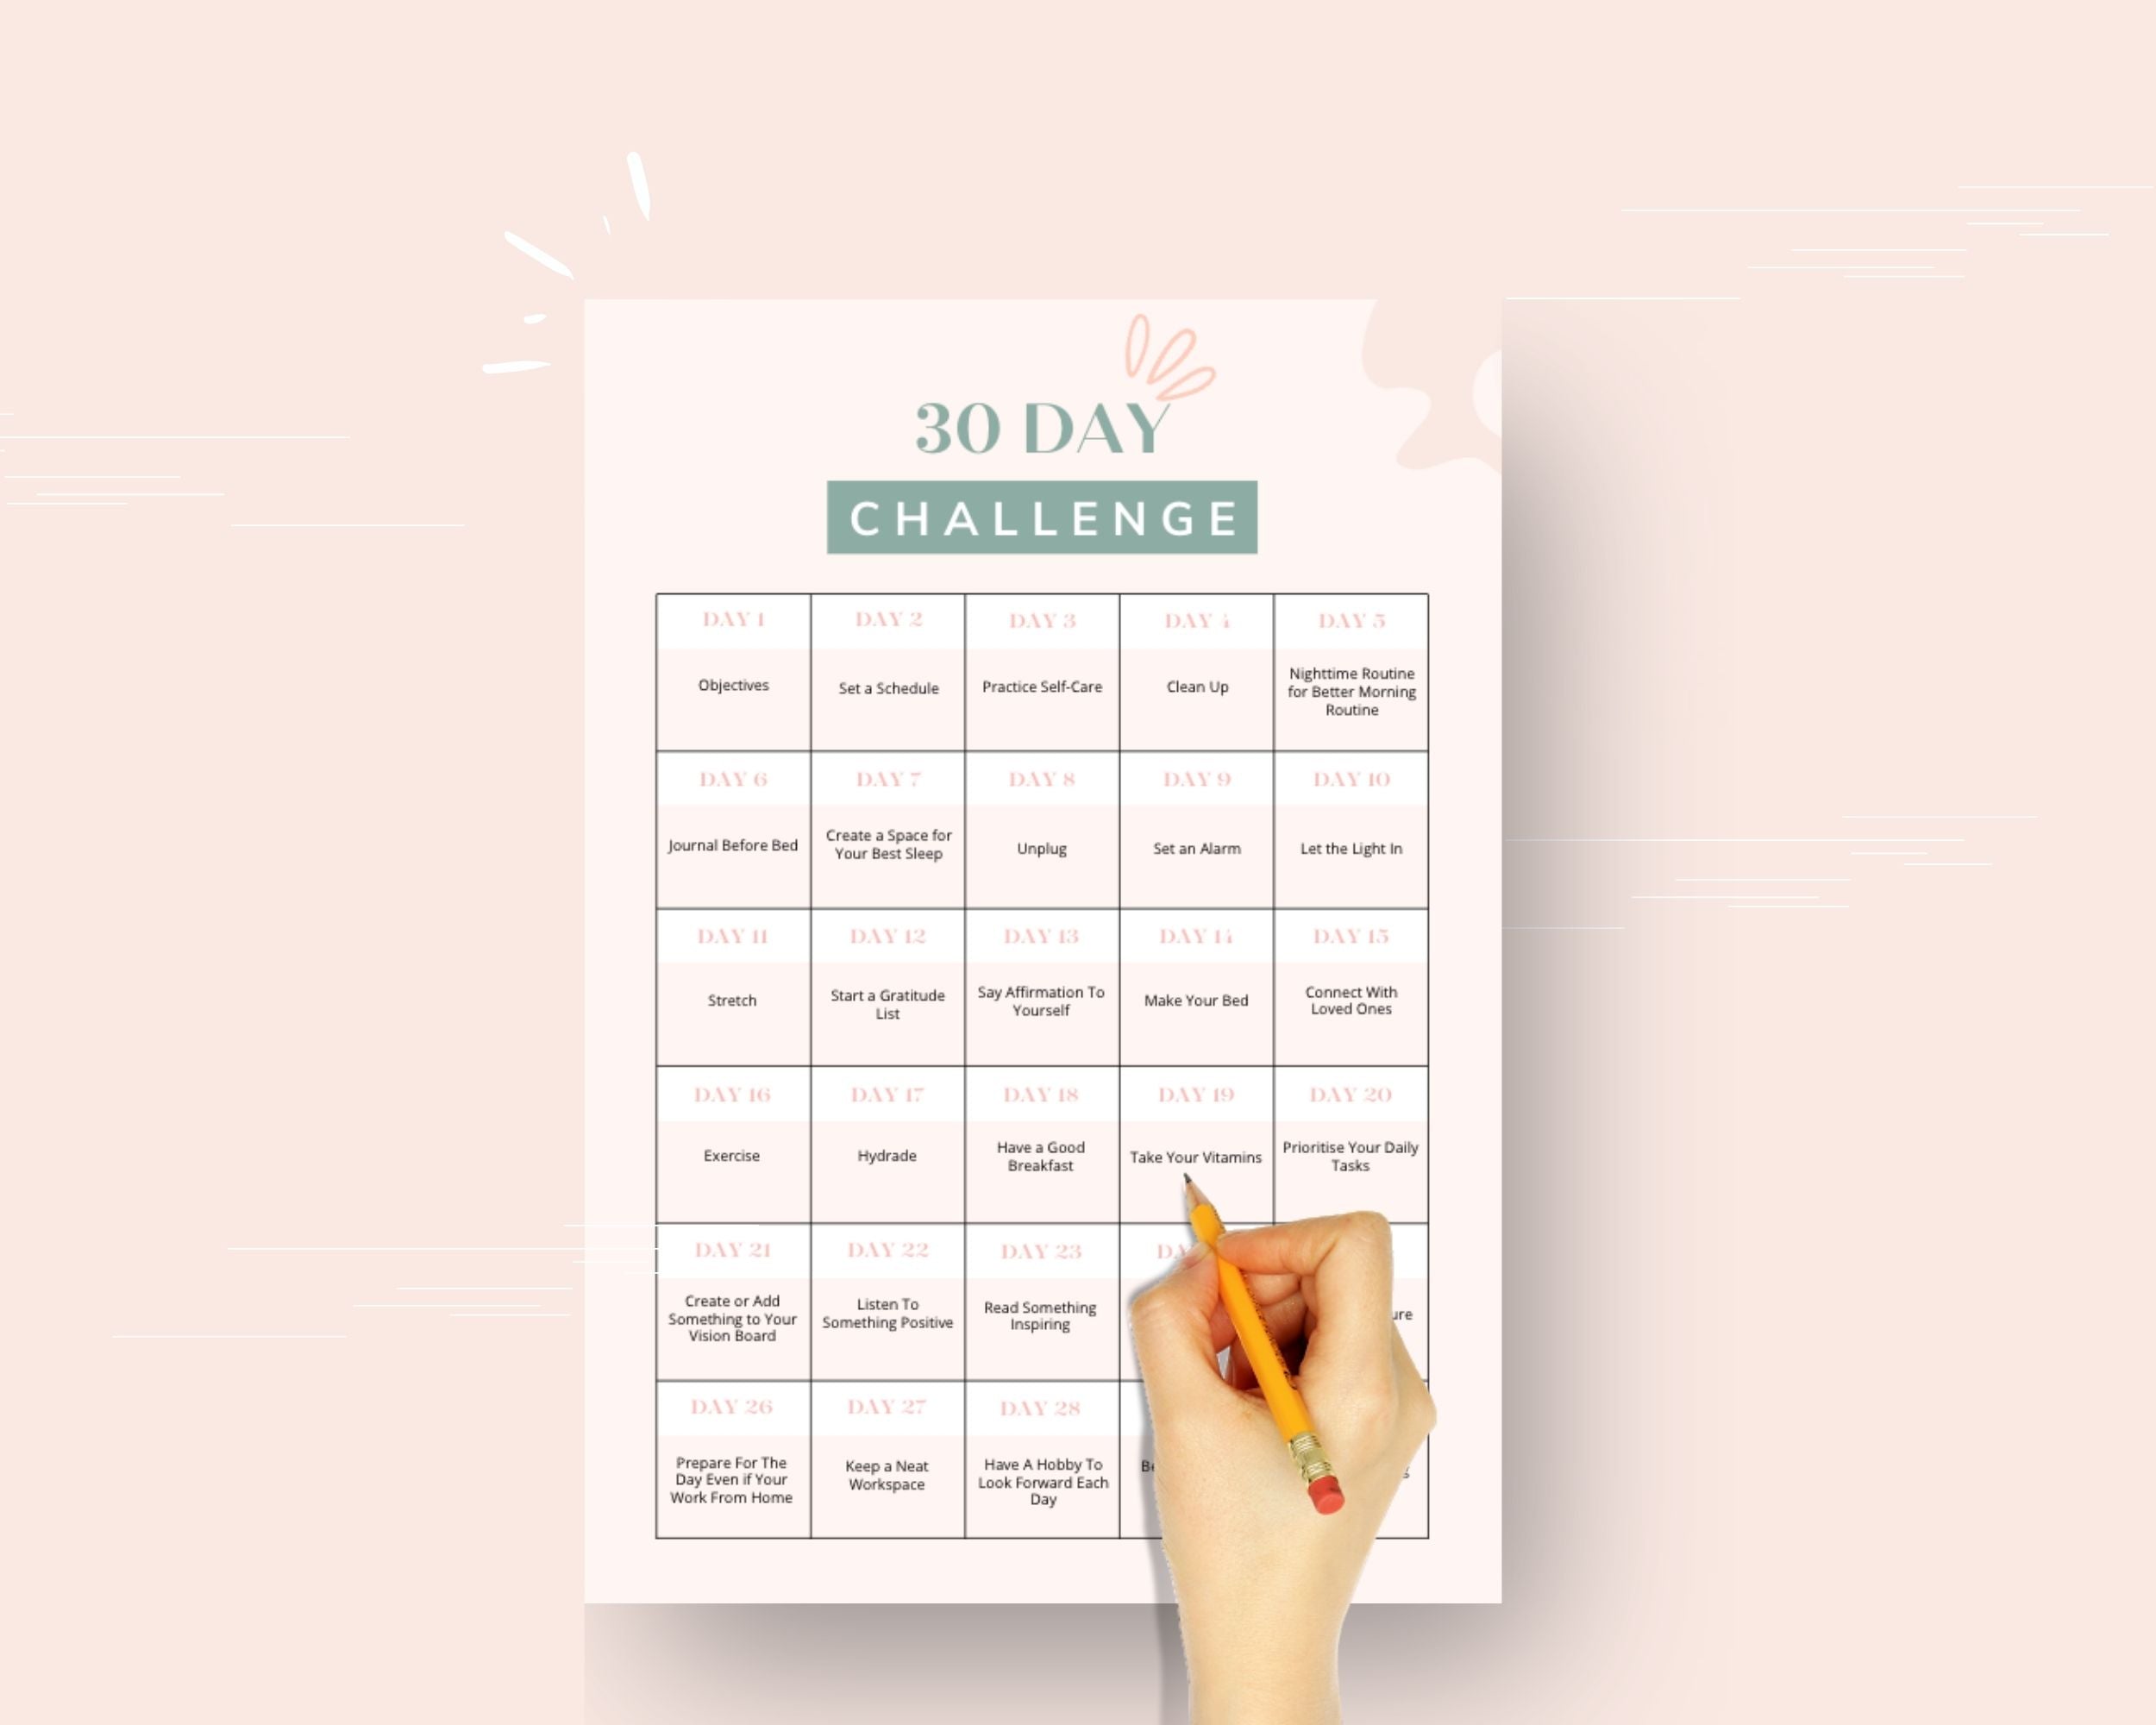 30-Day Win Your Mornings Challenge | Editable Canva Template A4 Size